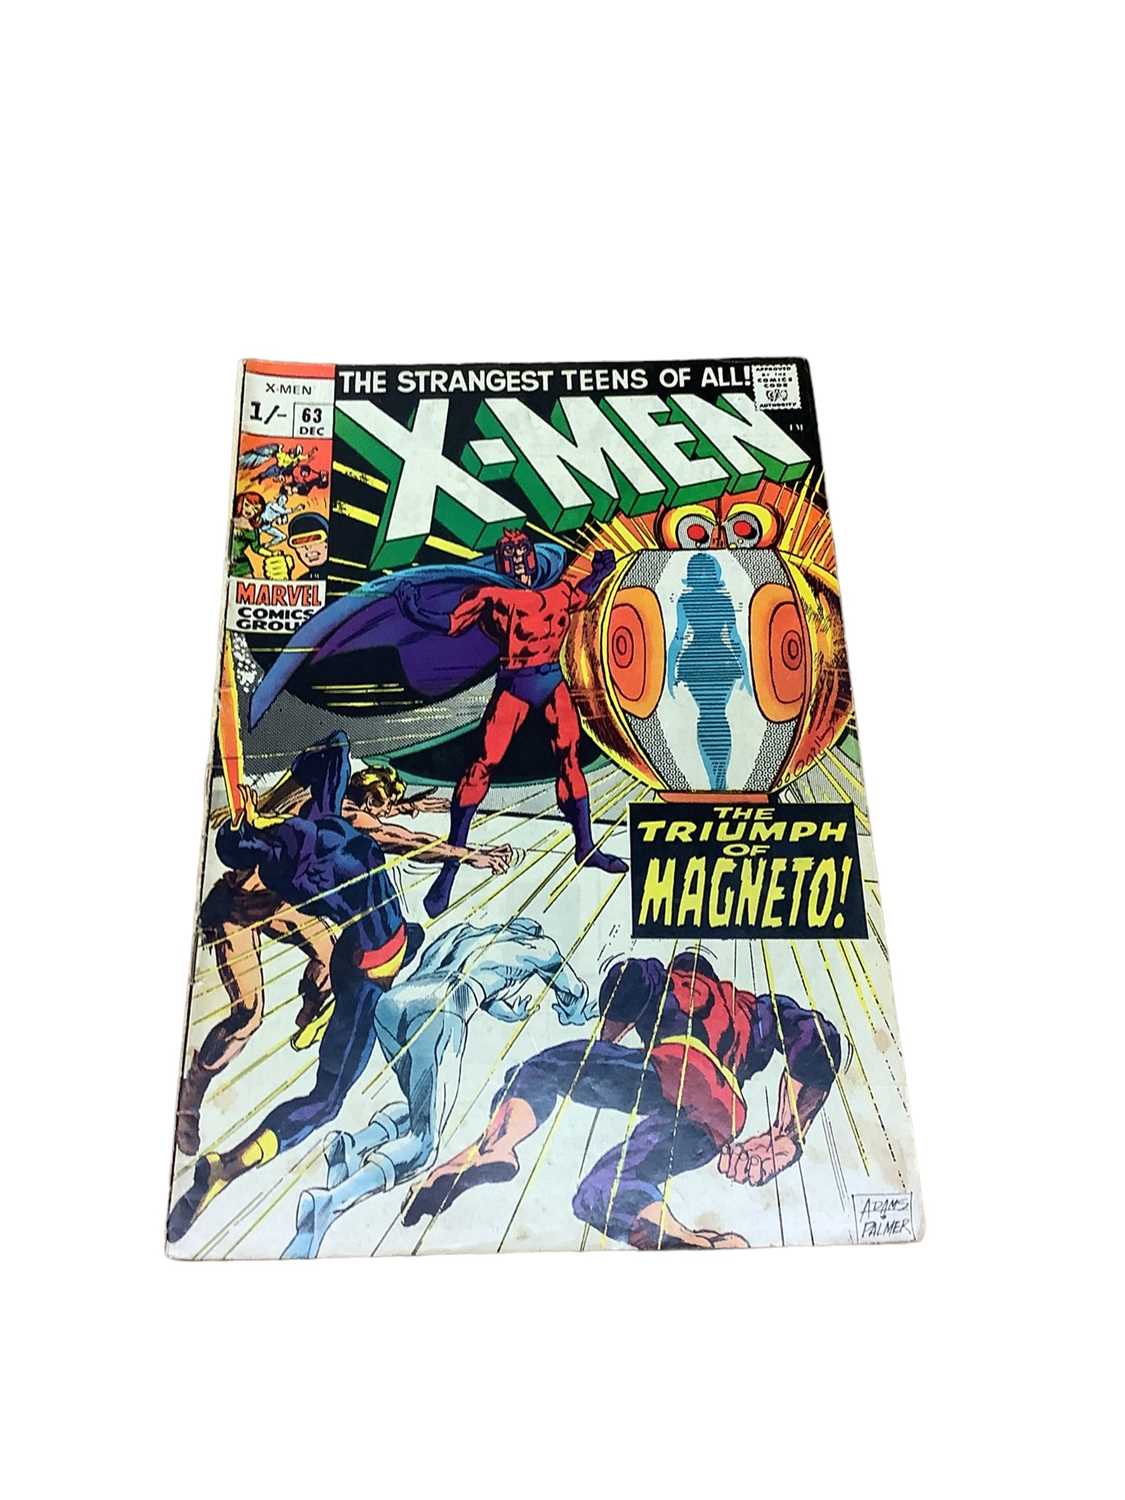 Marvel Comics X-Men #63 - (1969) 'The Triumph of Magneto!' Cover and interior art by Neal Adams